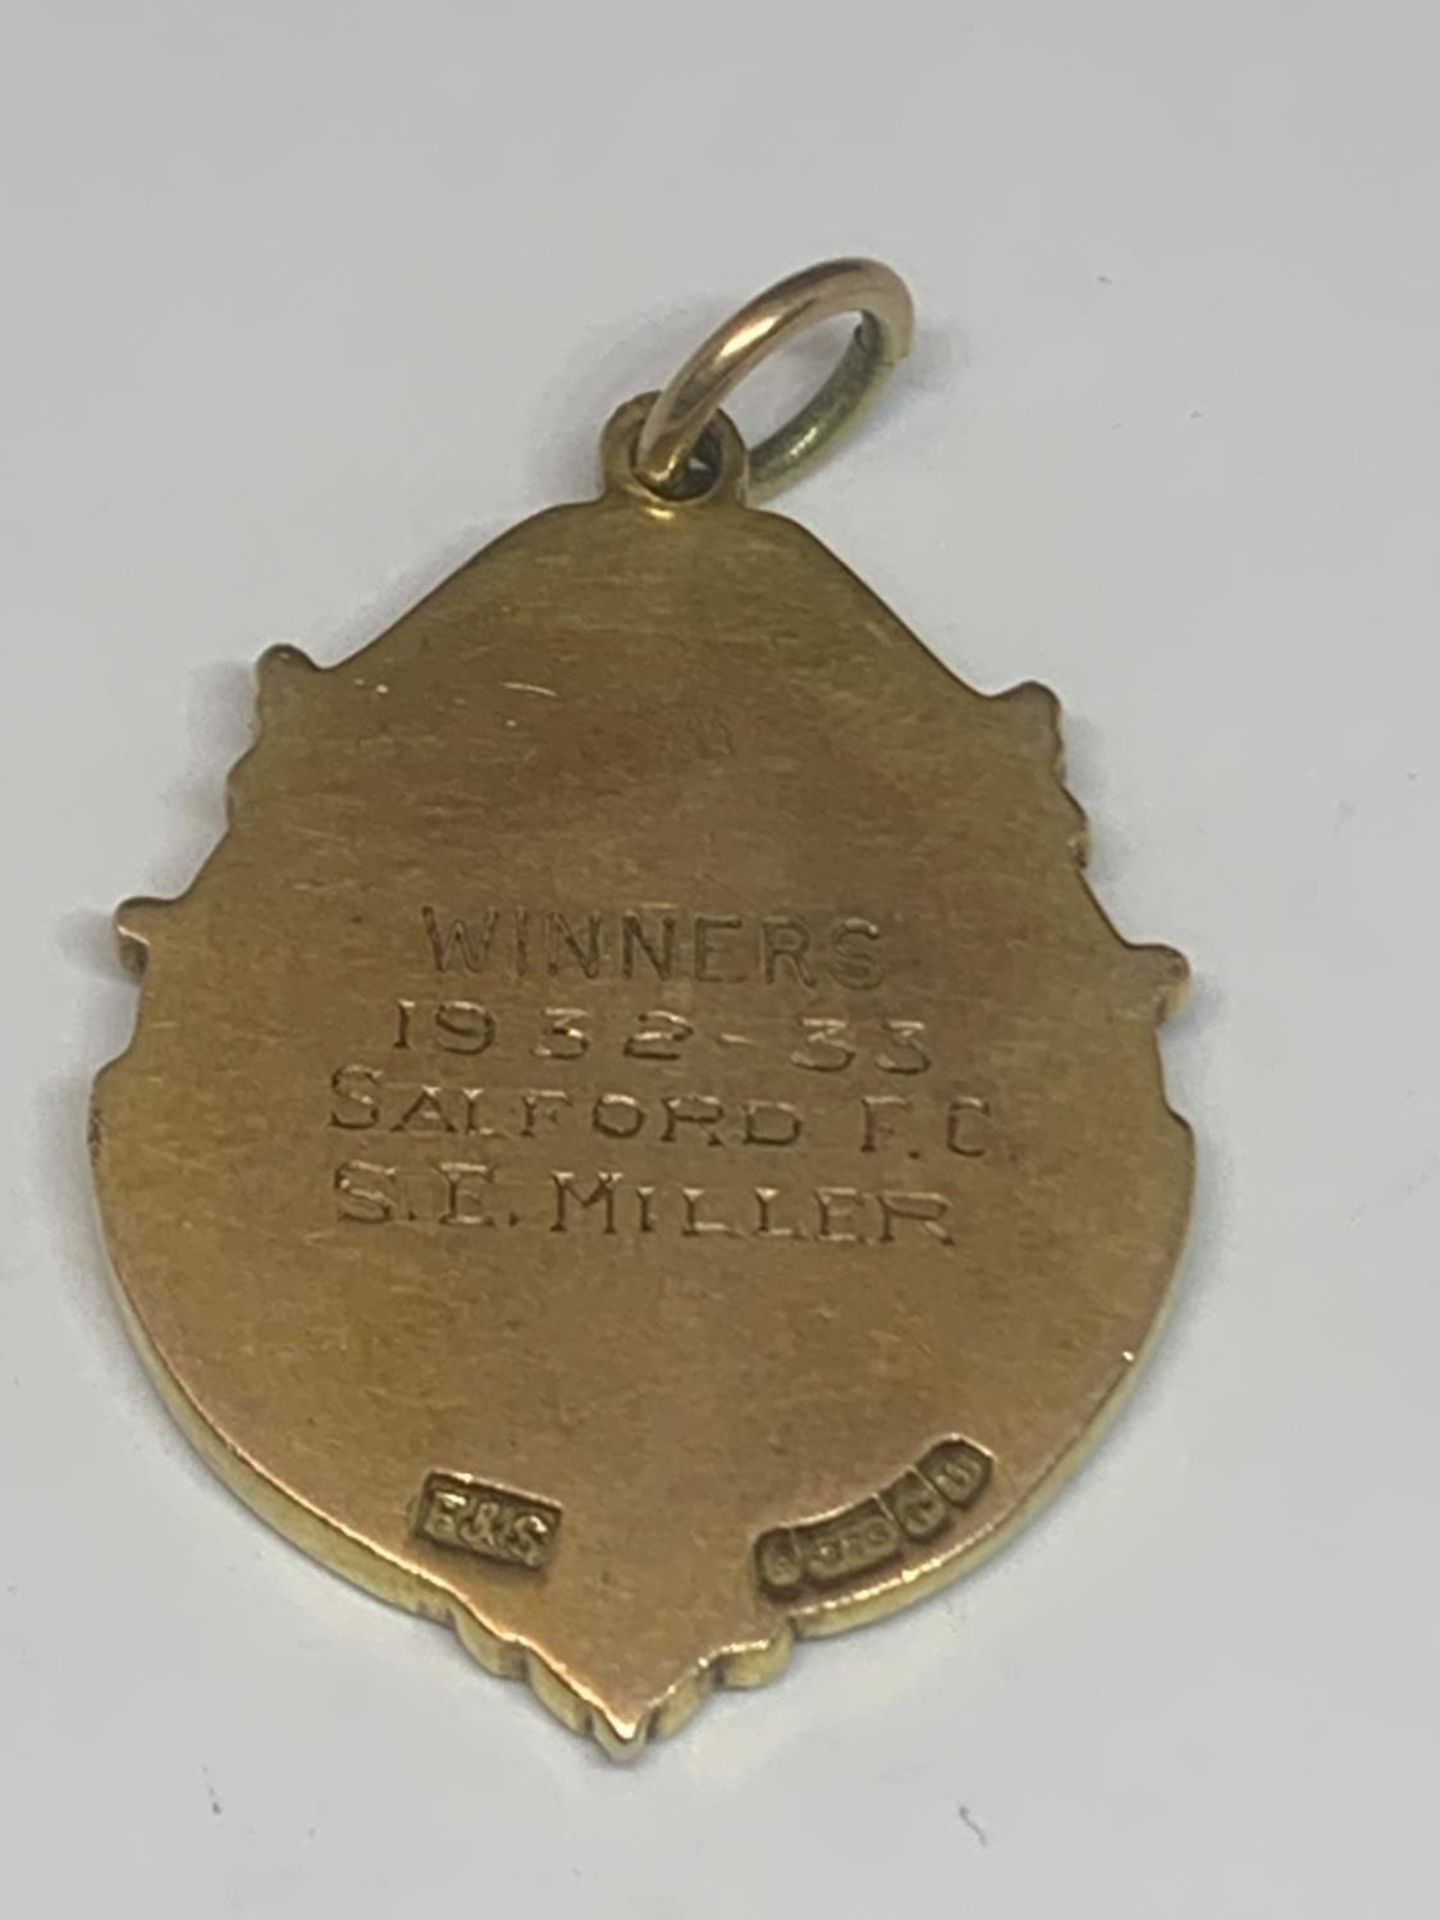 A HALLMARKED 9 CARAT GOLD LANCASHIRE RUGBY LEAGUE MEDAL ENGRAVED WINNERS 1932-33 SALFORD F.C., S.E. - Image 2 of 5